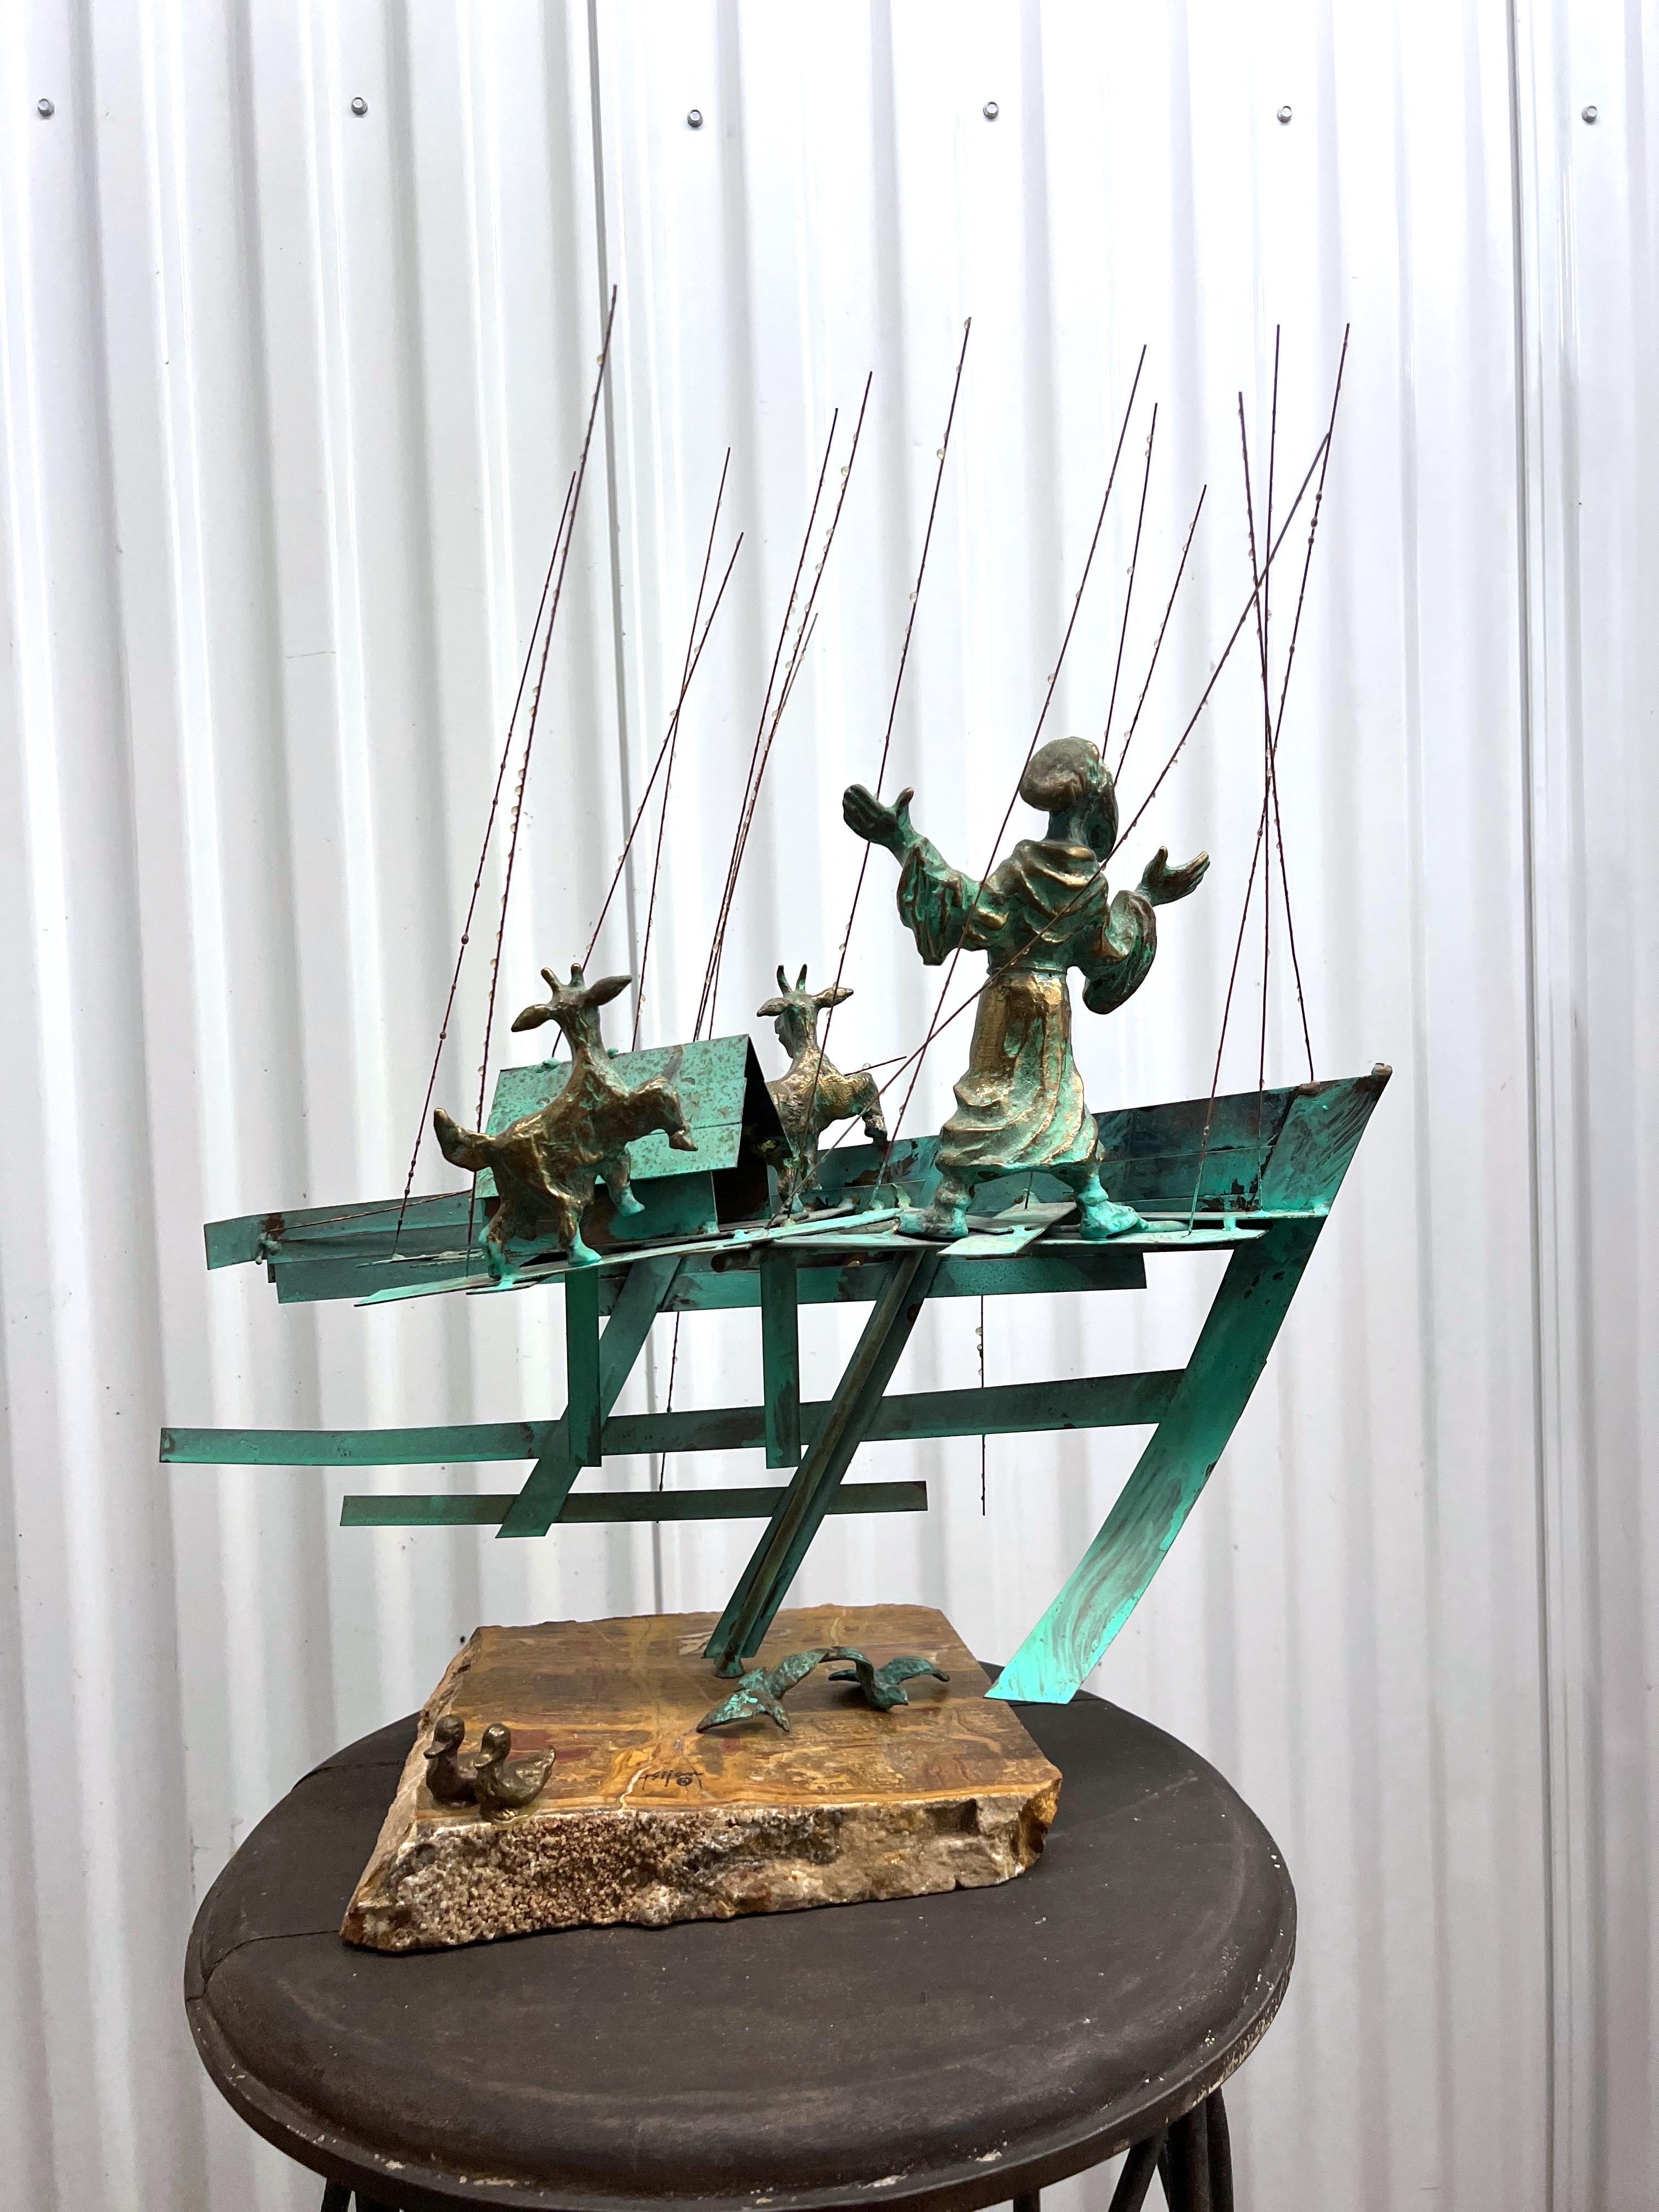 Bijan Signed Metal Art Sculpture of Man on Boat with Goats For Sale 4